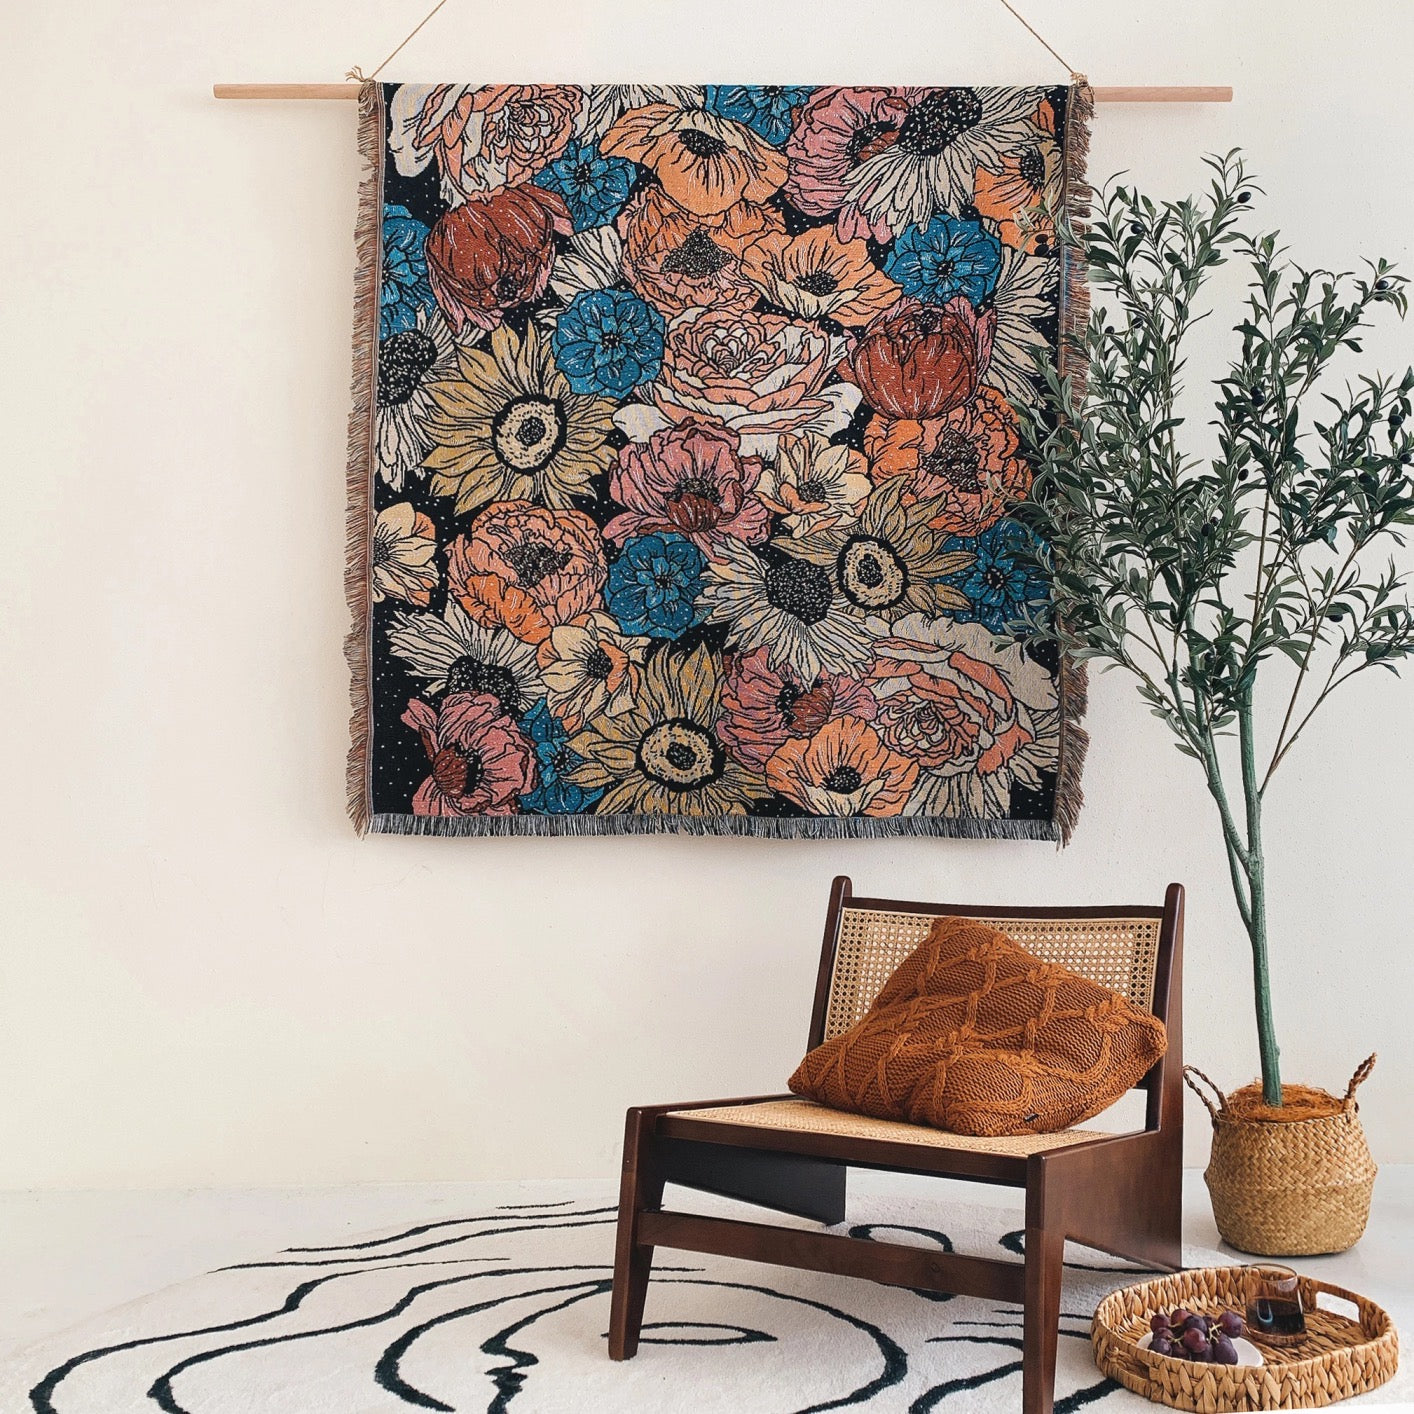 Flowers pattern on black background fabric Woven Boho Quilt Colorful Bohemian Tapestries with tassels in the room ,hanging on the wall like a decorative tapesties